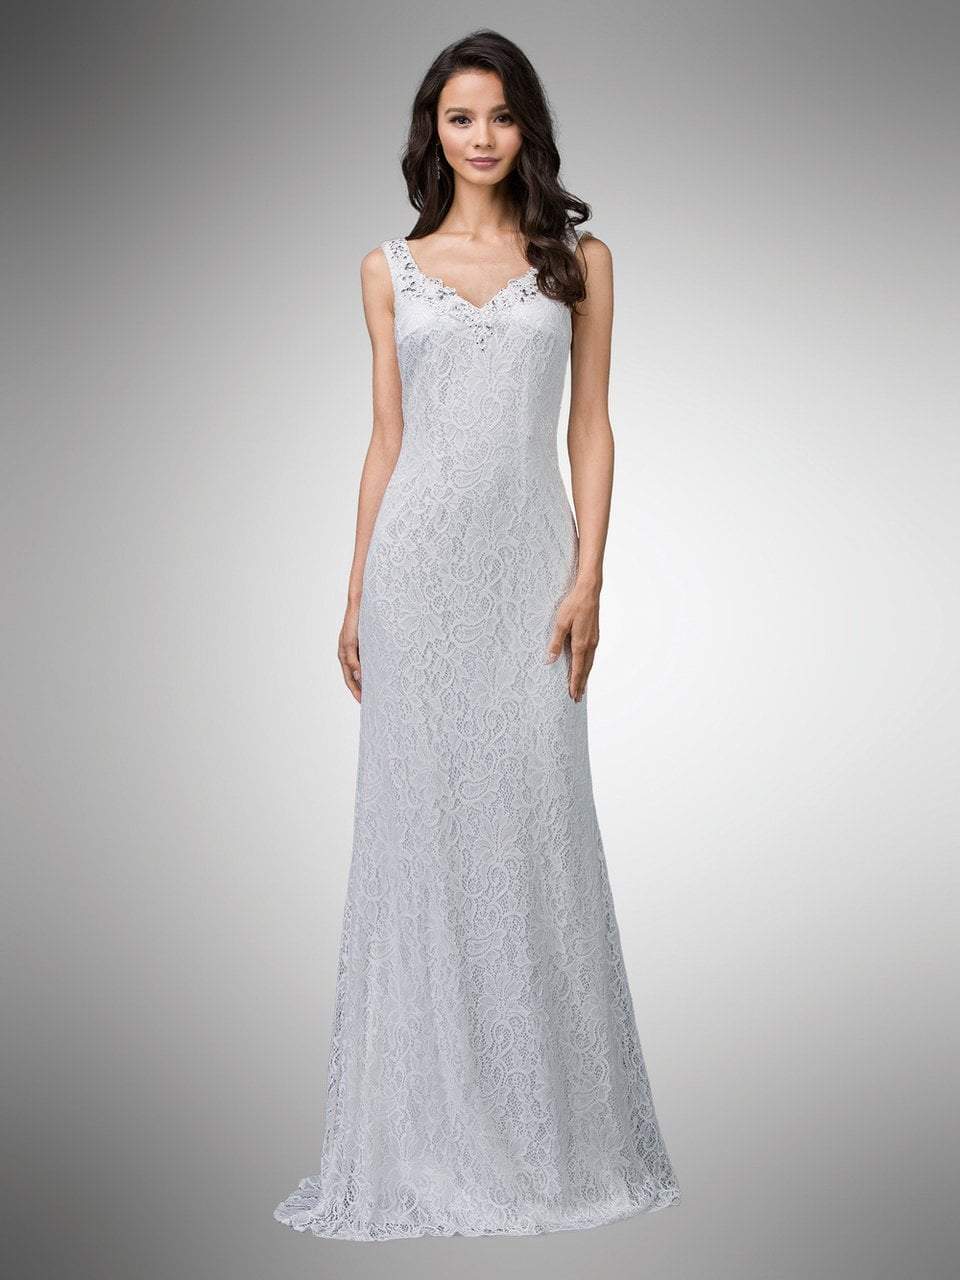 Image of Dancing Queen Bridal - 9981 Bedazzled Lace V-neck Sheath Dress